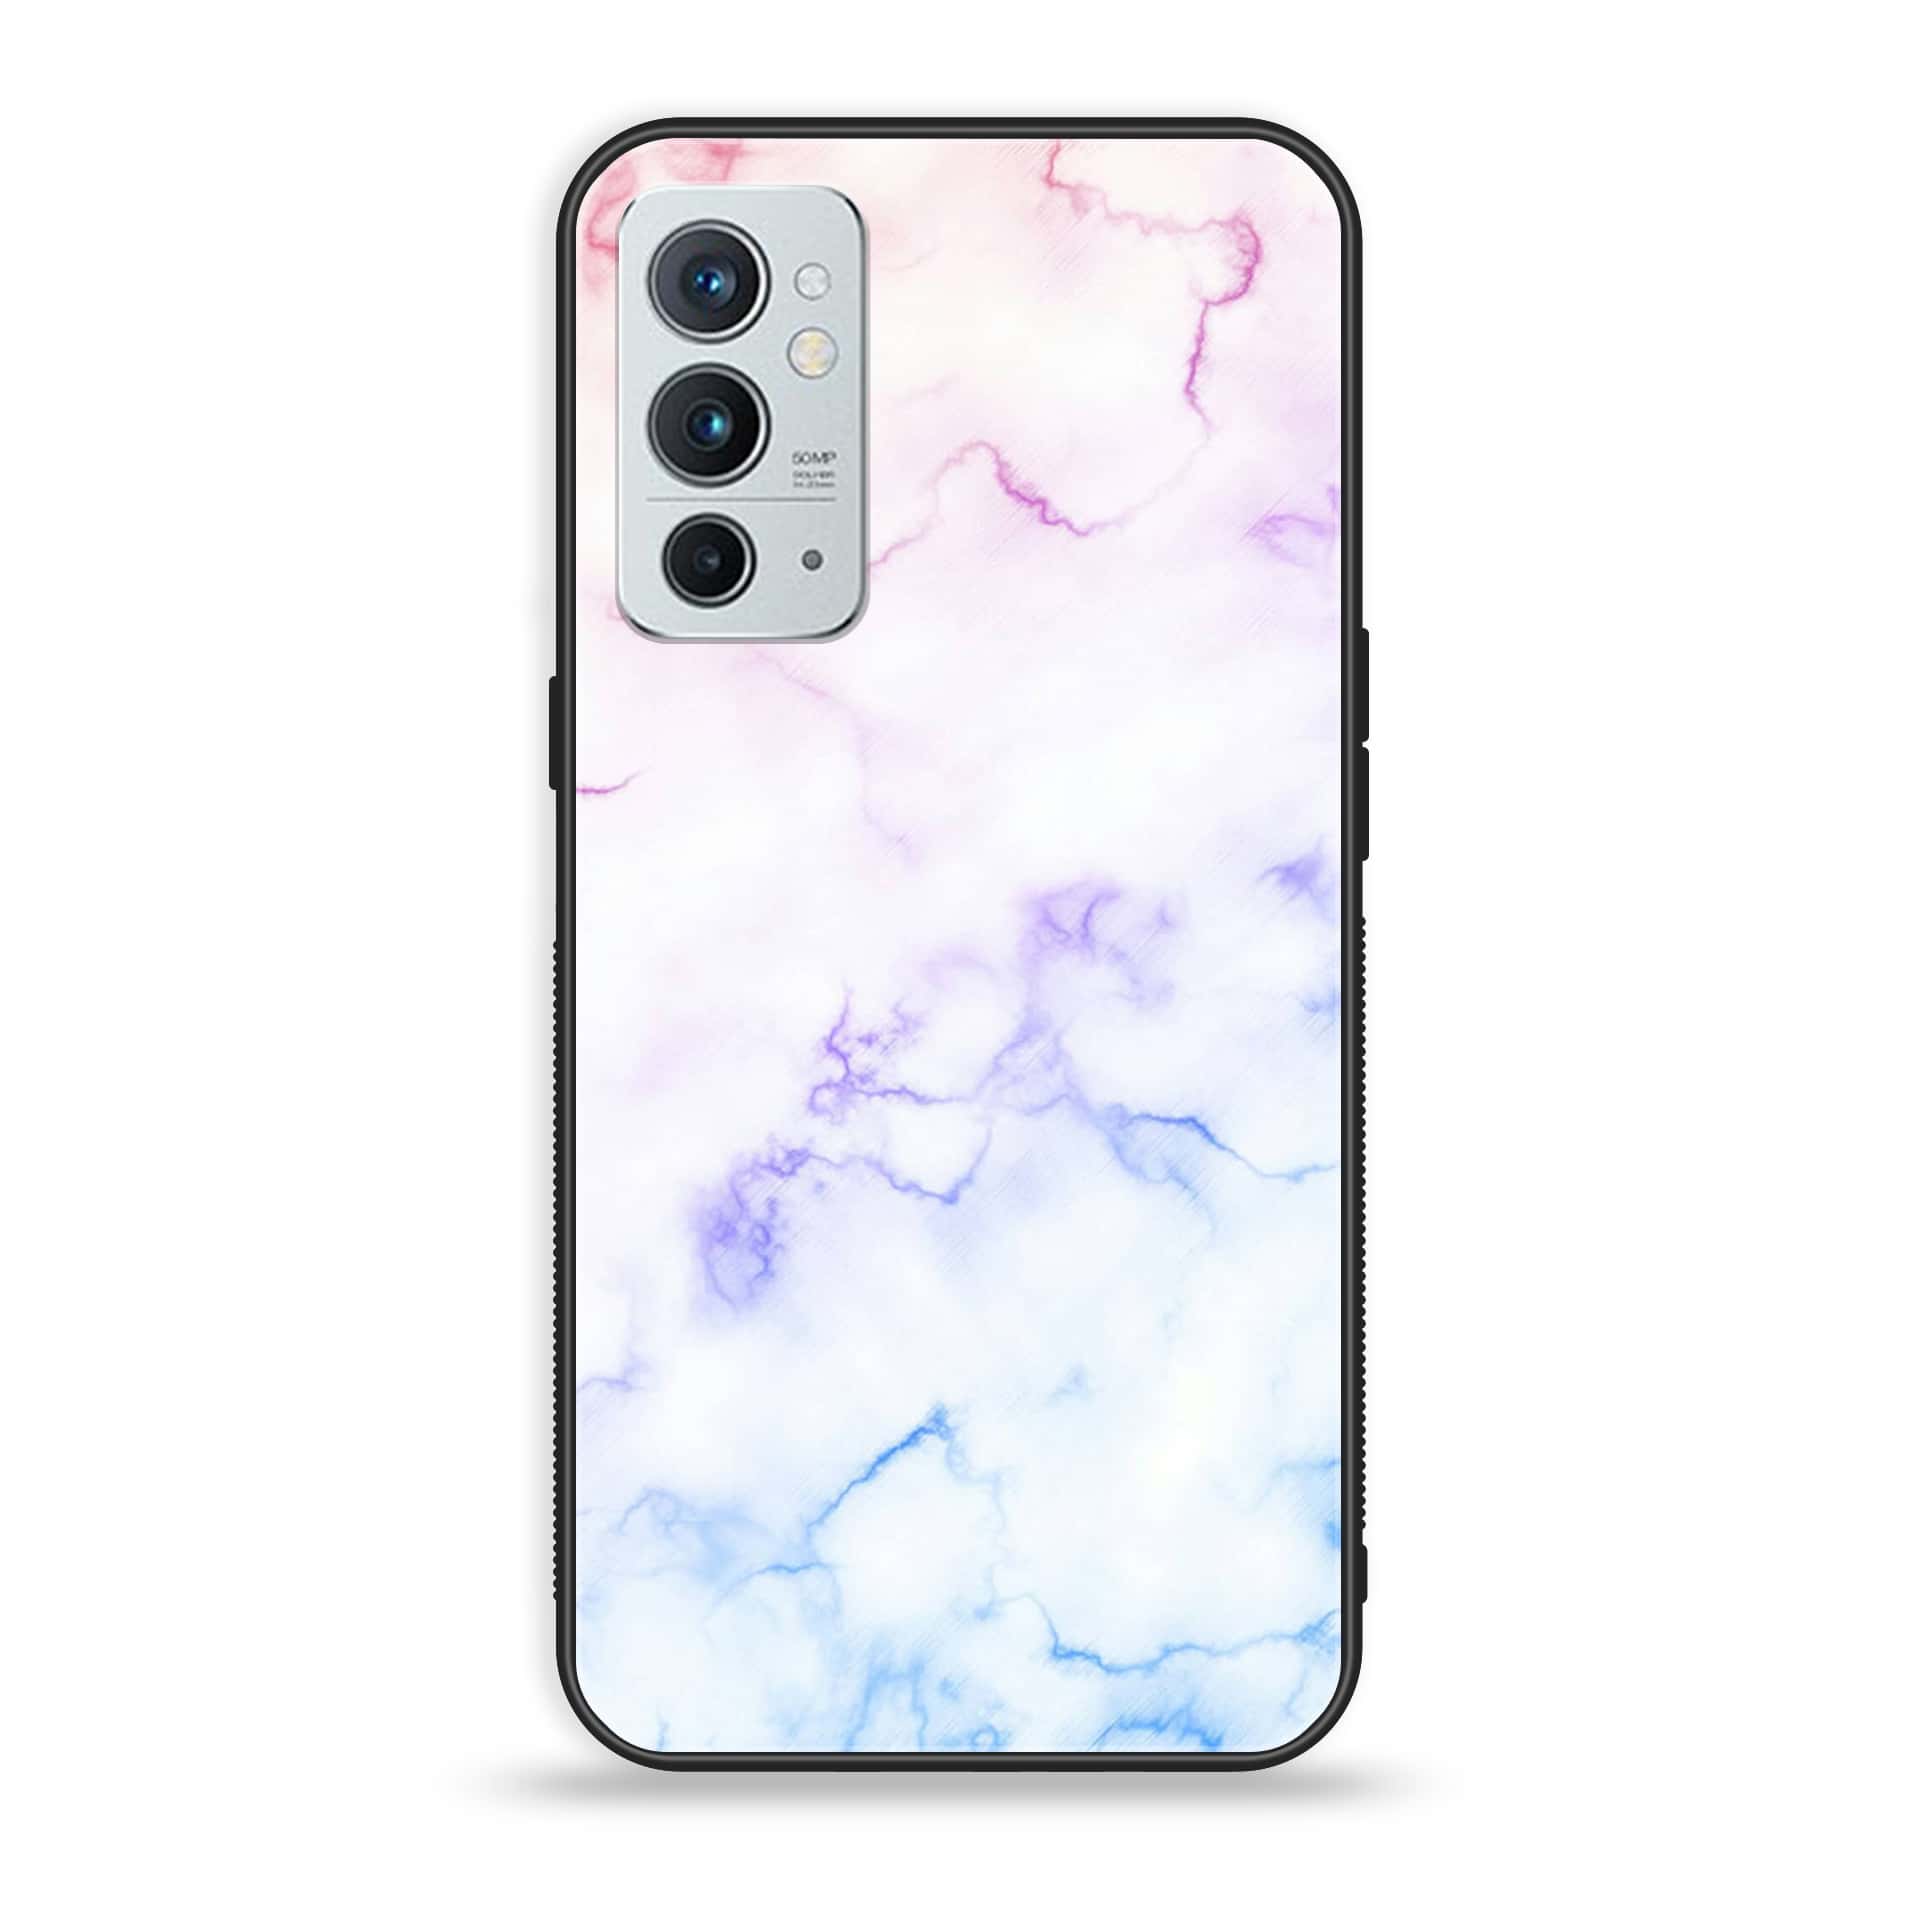 OnePlus 9RT 5G - White Marble Series - Premium Printed Glass soft Bumper shock Proof Case